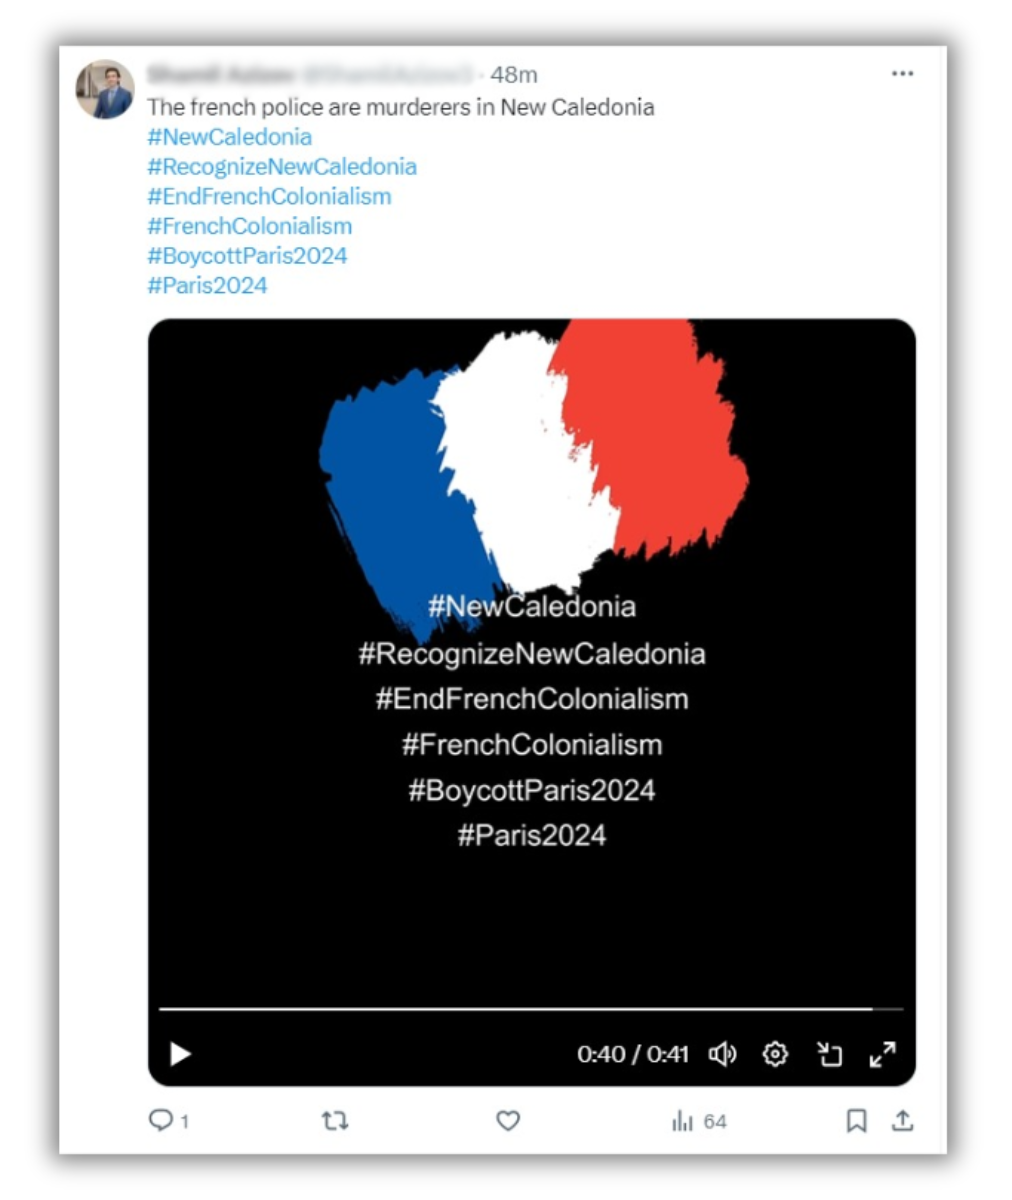 During the day of Thursday, May 16, the disinformation and denigration campaign targeting the action of law enforcement in New Caledonia continued with the broadcast of another montage relayed on the same accounts.